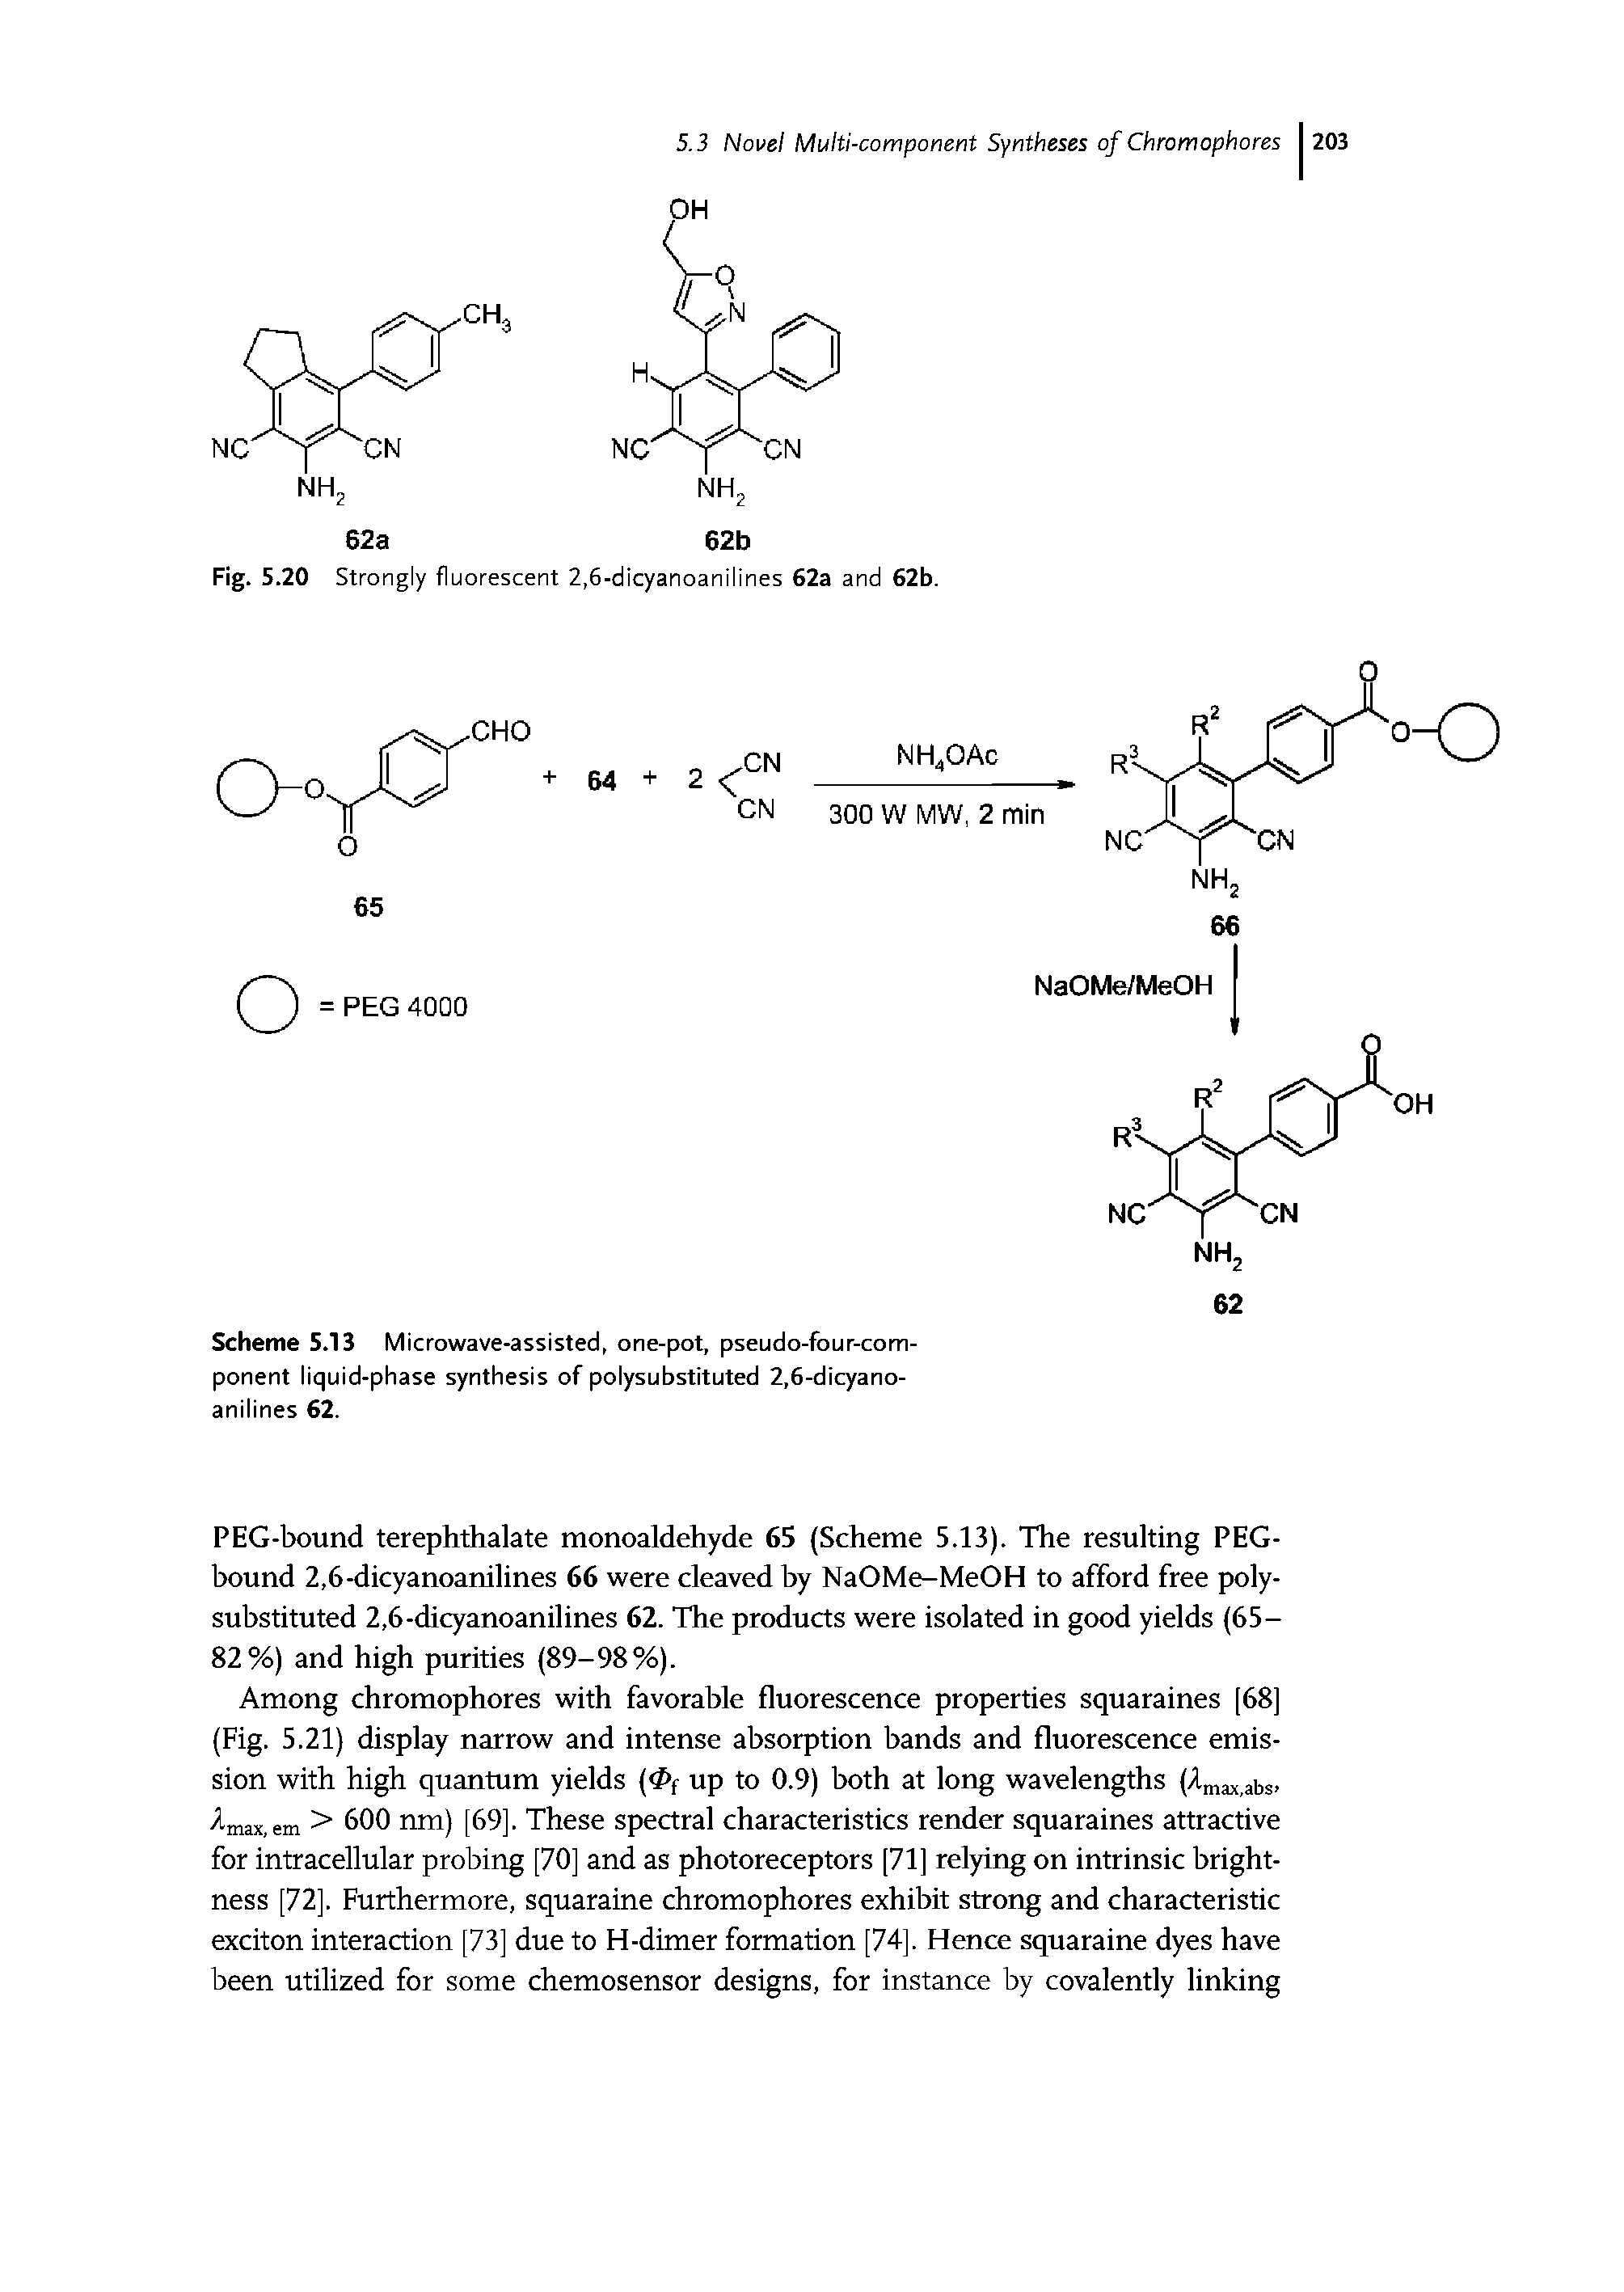 Scheme 5.13 Microwave-assisted, one-pot, pseudo-four-com-ponent liquid-phase synthesis of polysubstituted 2,6-dicyano-anilines 62.